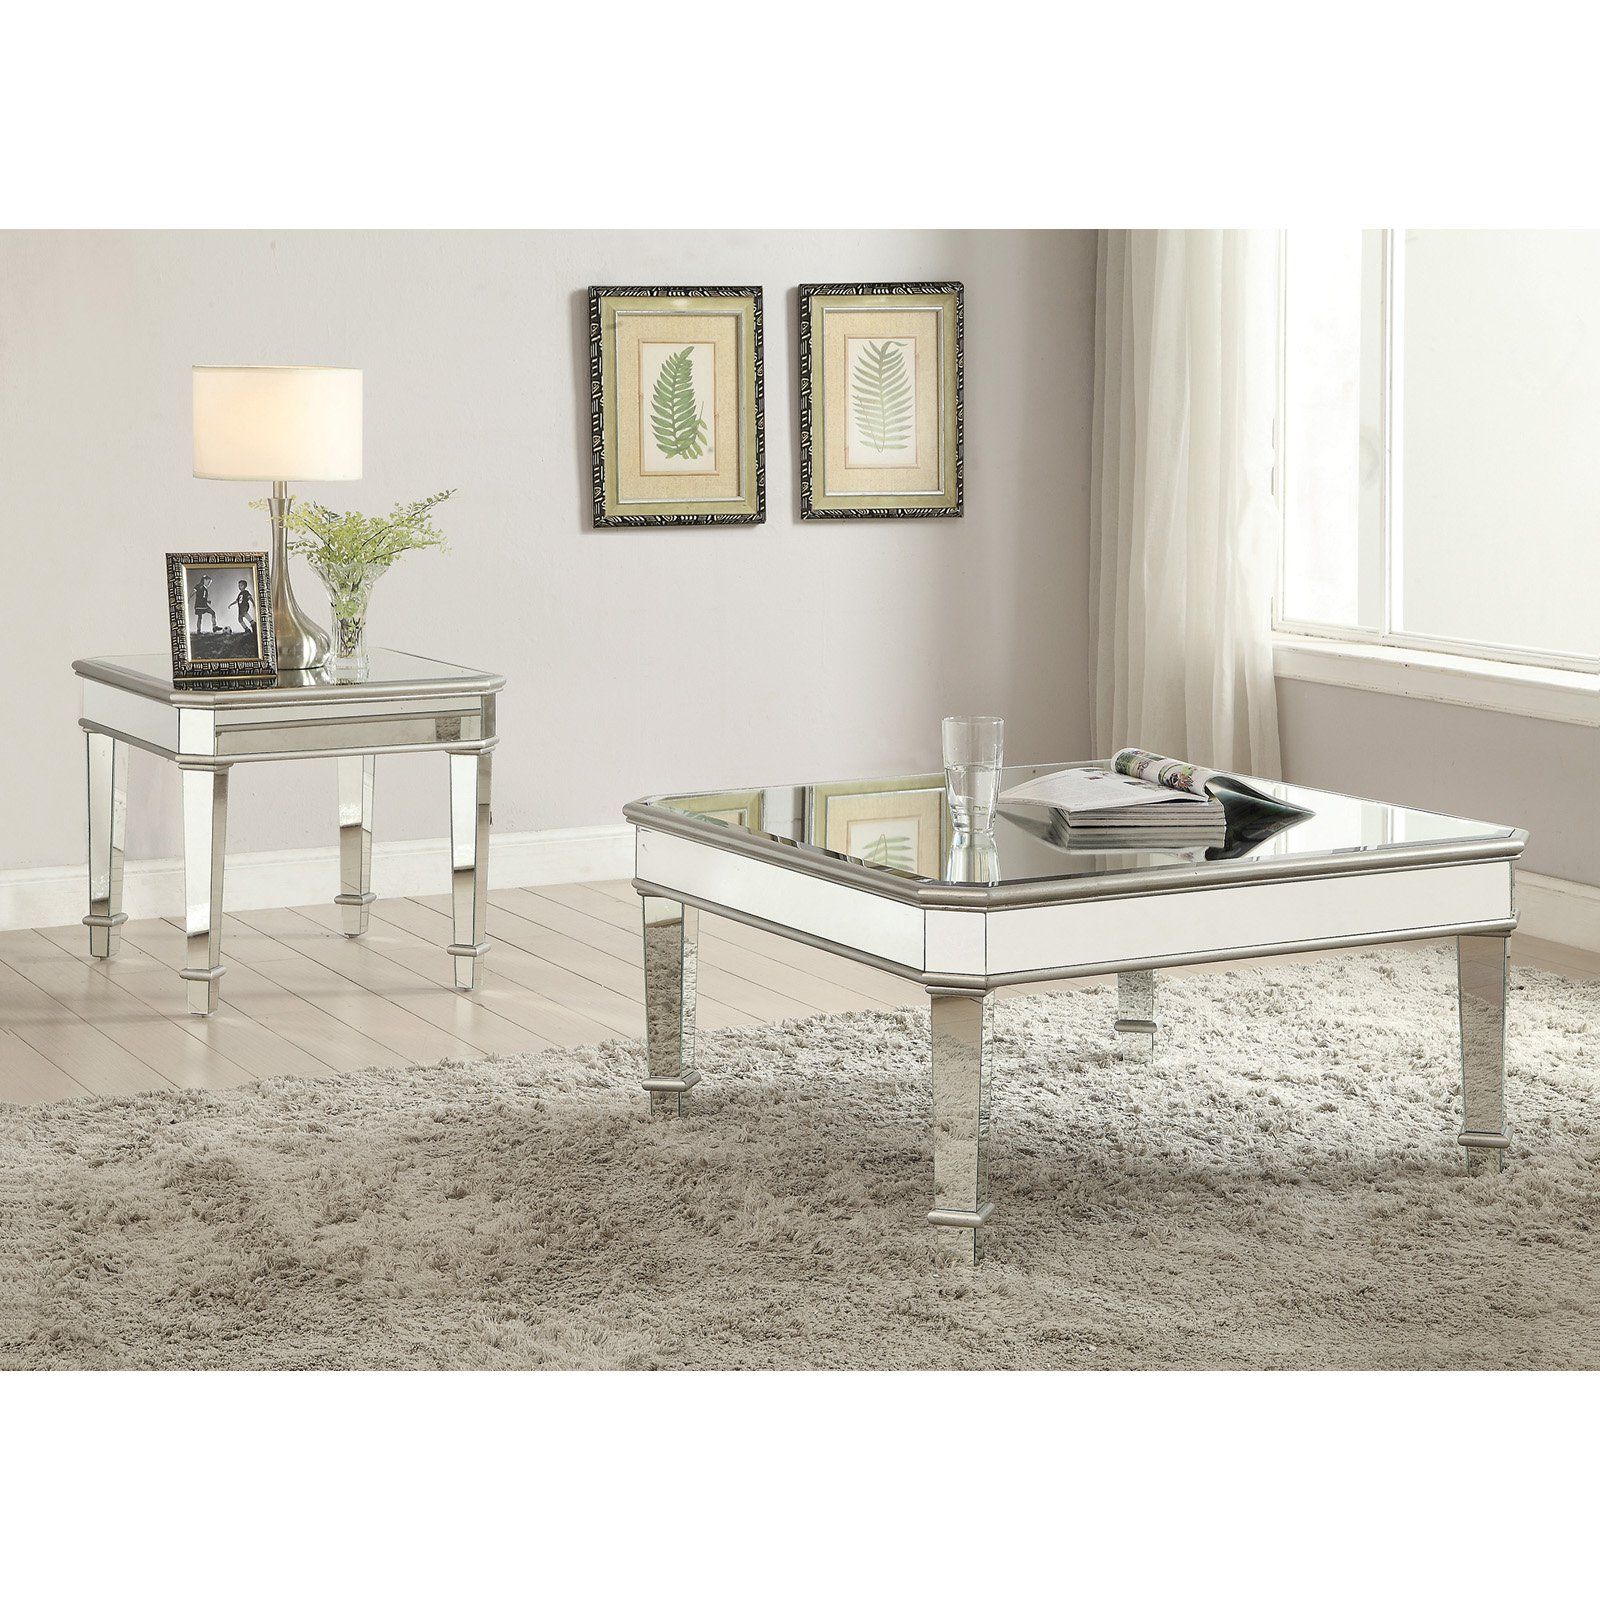 Coaster Company Transitional Coffee Table, Silver With Regard To Most Up To Date Coaster Company Silver Glass Coffee Tables (View 2 of 20)